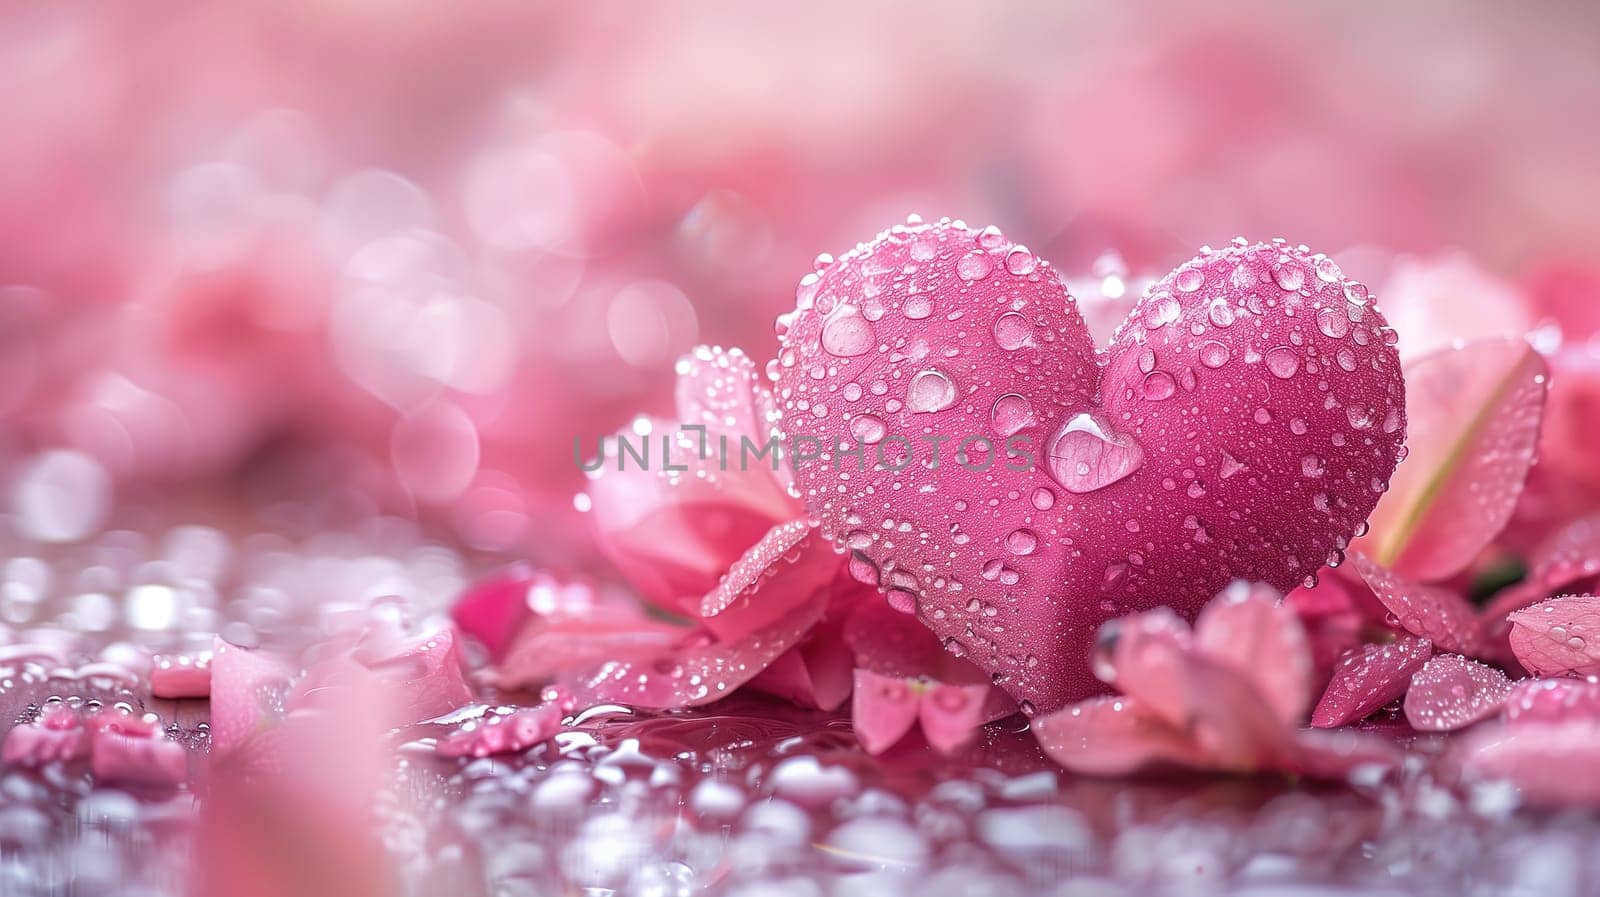 A close-up of a pink heart ornament adorned with water droplets, surrounded by delicate petals, set up as part of the decor for an International Mothers Day concert celebration, highlighting the theme of love and appreciation.